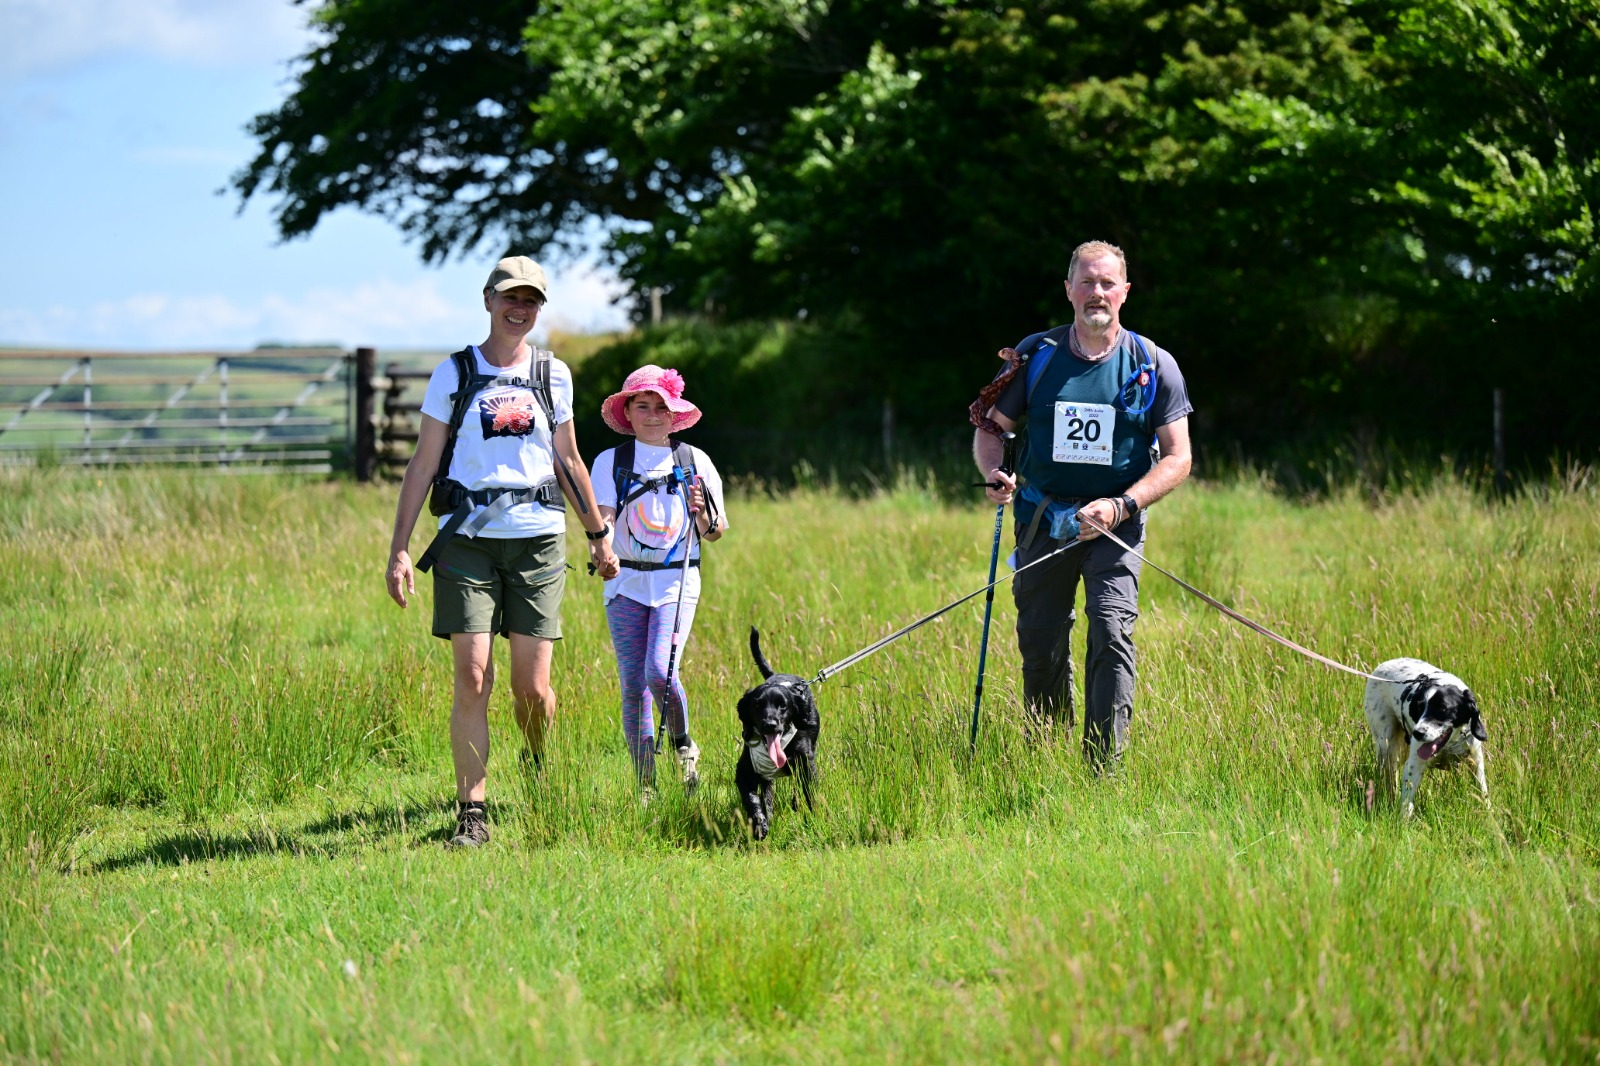 The Exmoor Running and Walking Festival